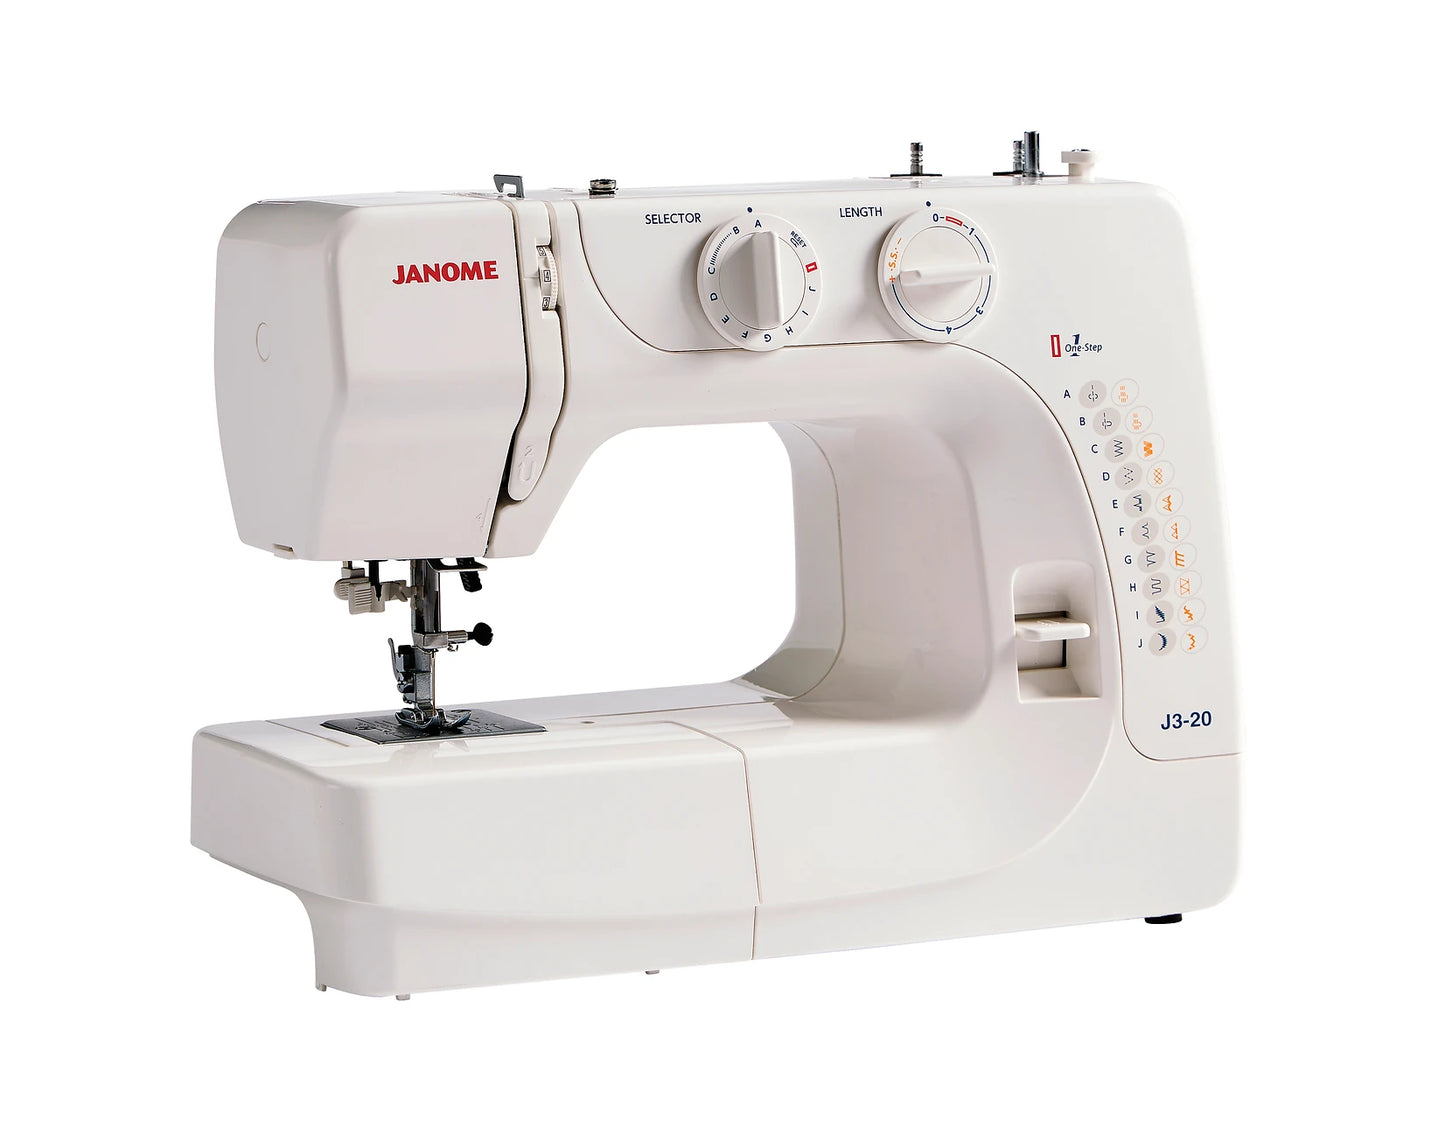 The Janome Model J3-20 Sewing Machine - Retail price £259.